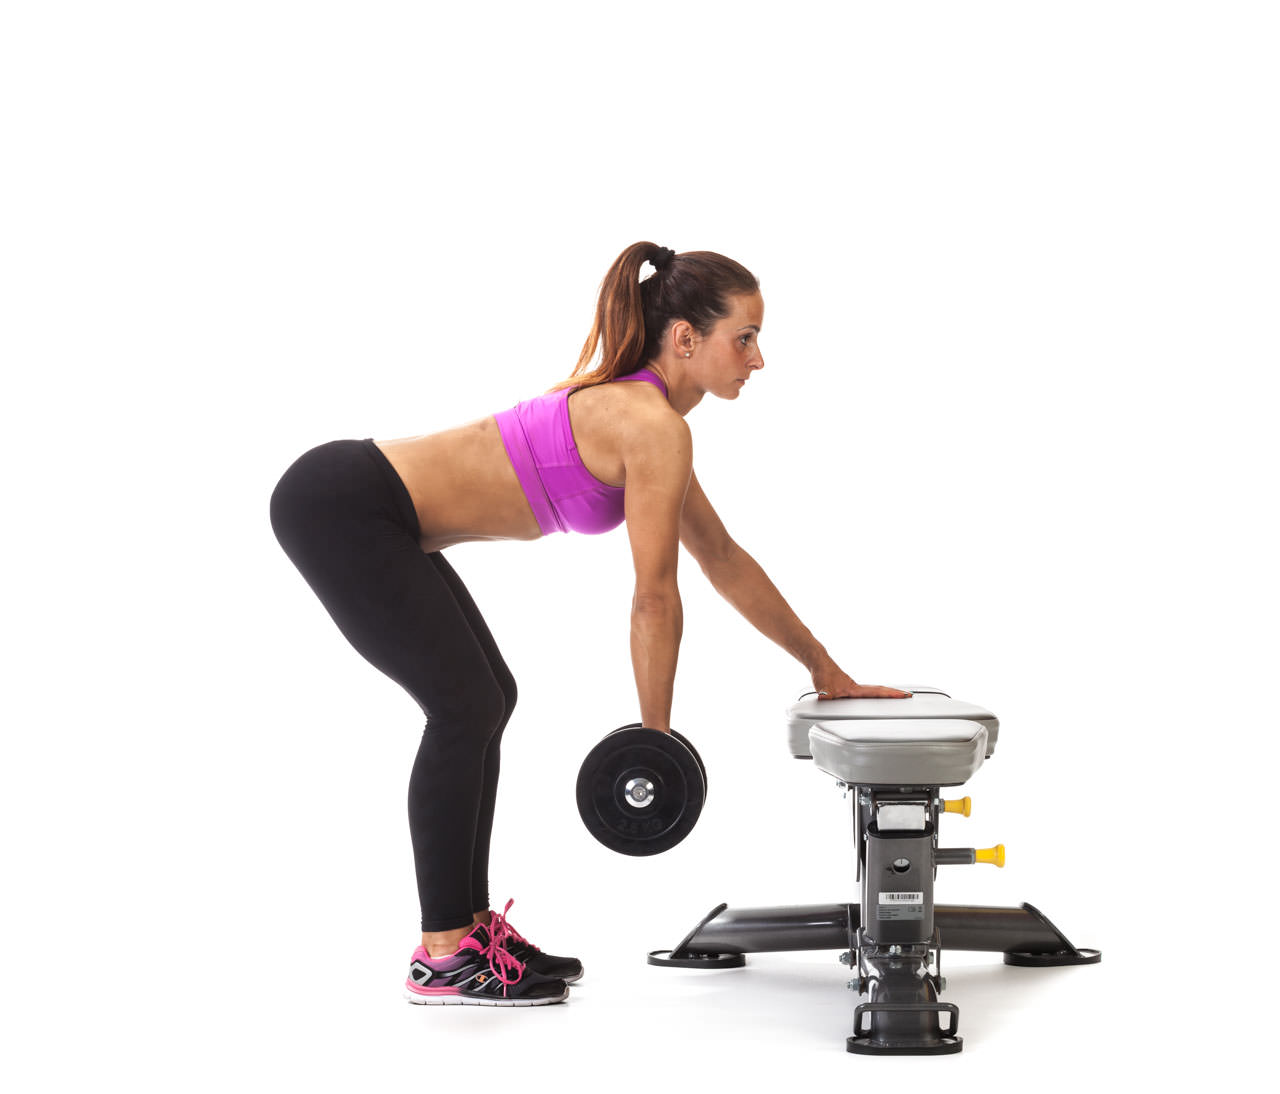 Bent Over One-Arm Dumbbell Row frame #1